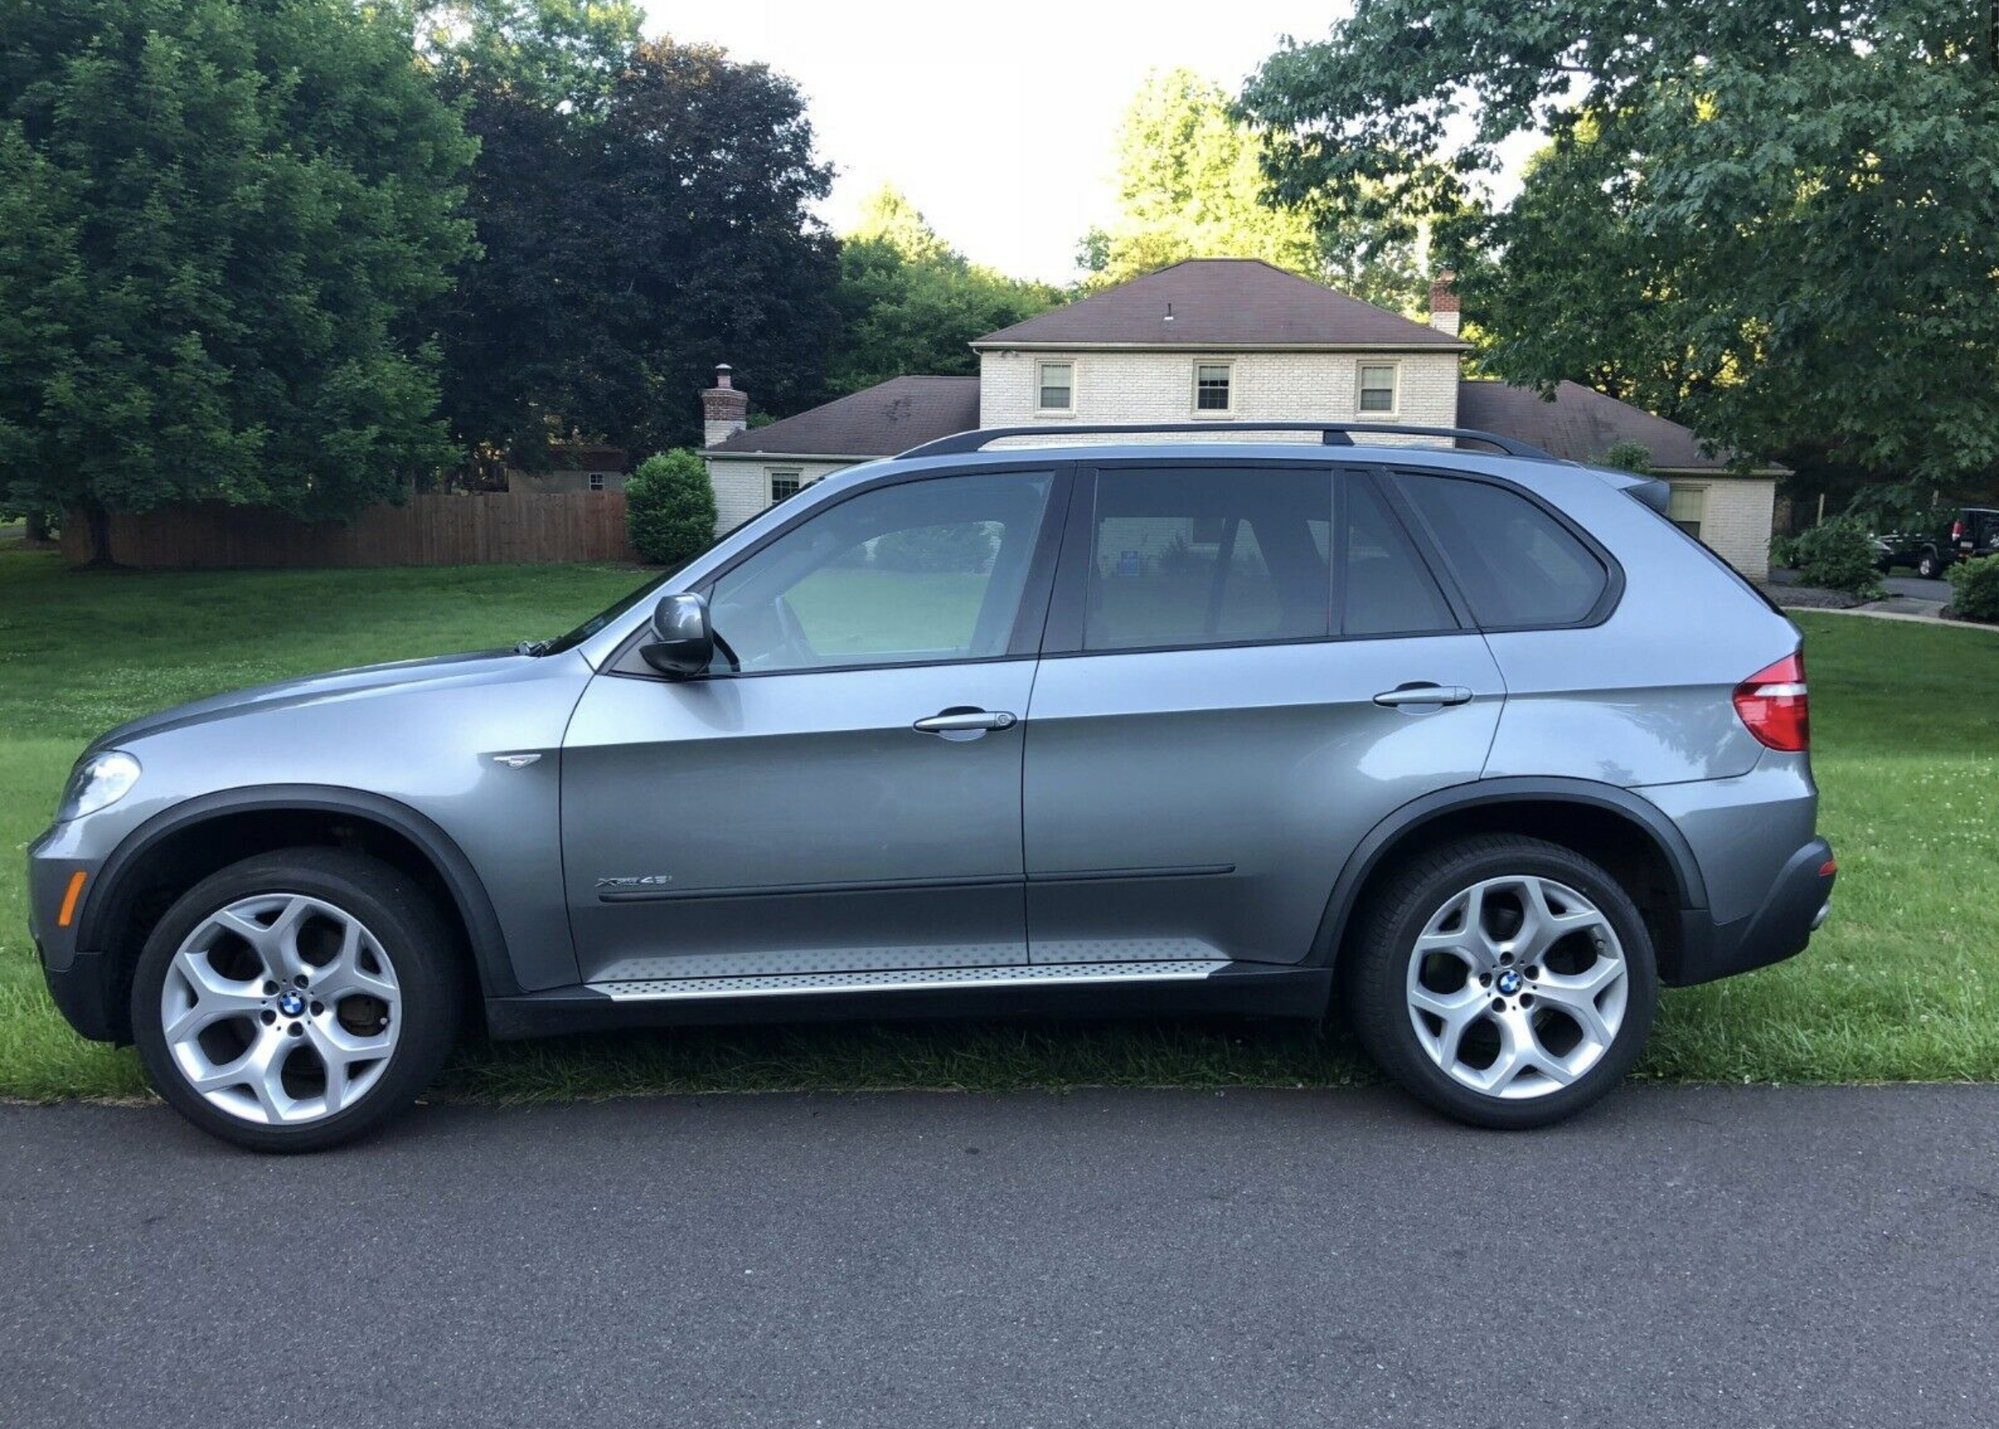 2010 BMW X5 - 2010 BMW X5 4.8i Excellent Condition - Fun, Fast and Tows Great! $13K OBO - Used - VIN 5UXFE8C57AL310436 - 98,000 Miles - 8 cyl - 4WD - Automatic - SUV - Gray - New Hope, PA 18938, United States